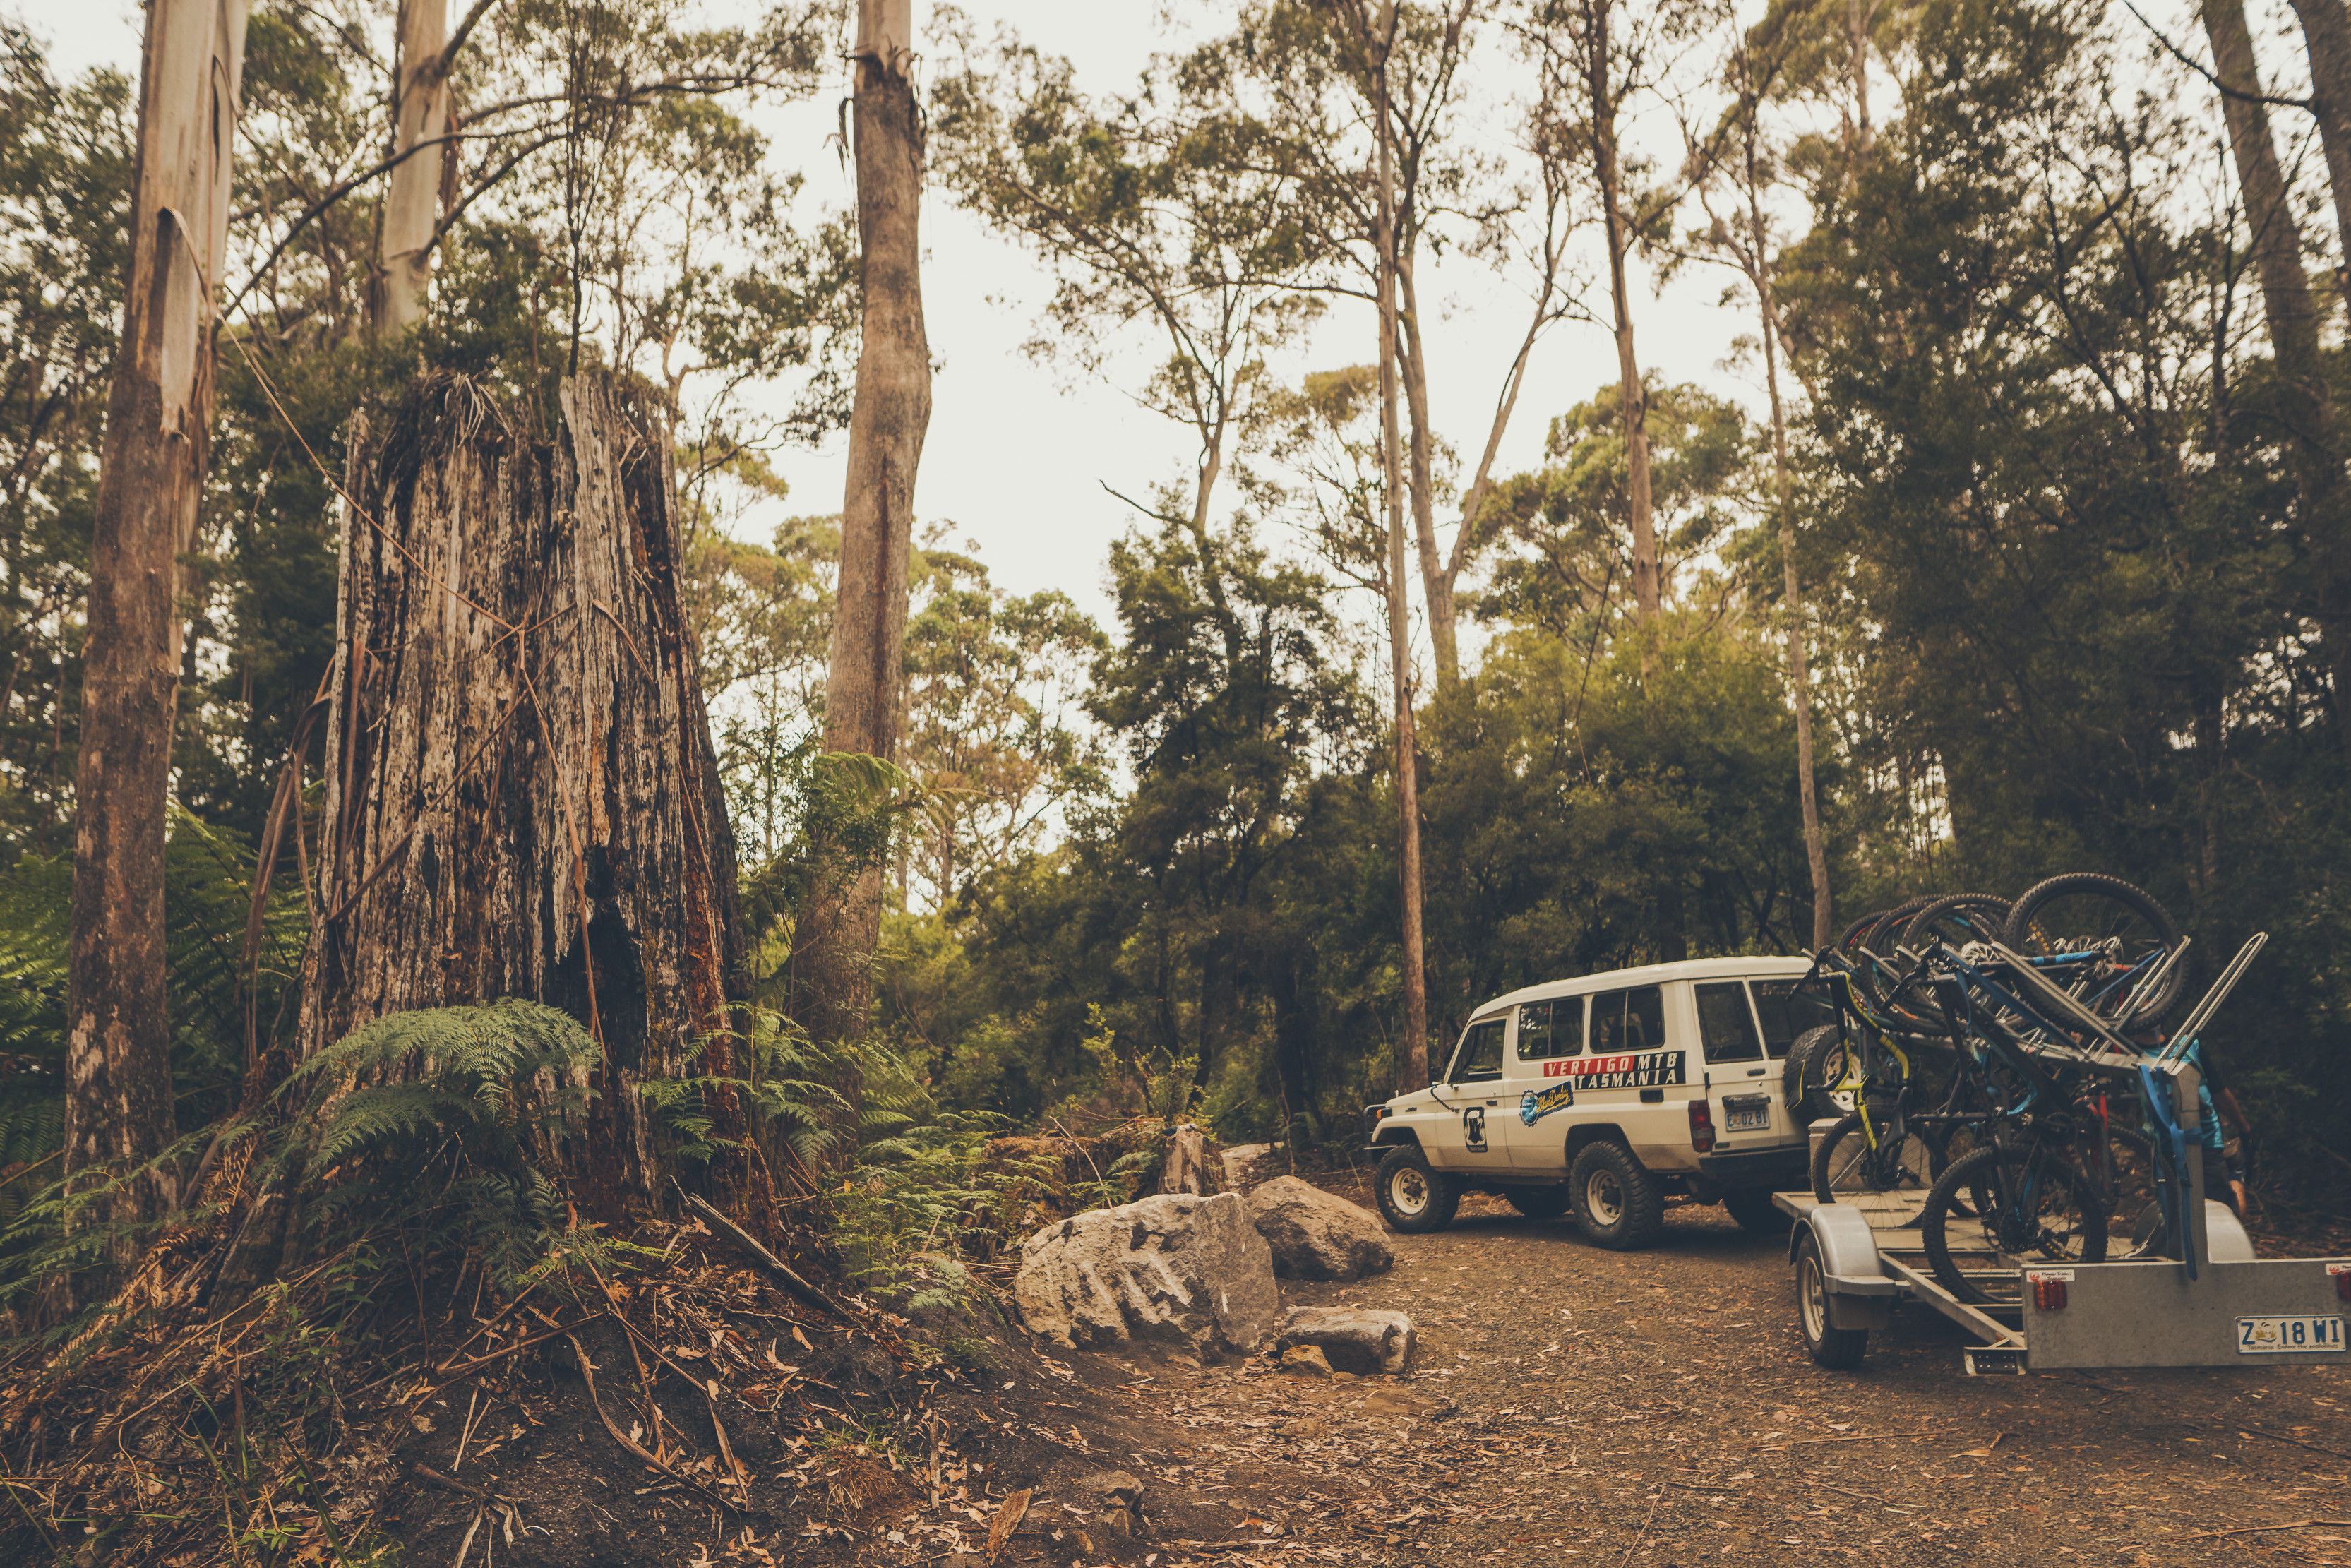 Image of a VertigoMTB car with a trailer attached of a plethora of mountain bikes, surrounded by bushland.